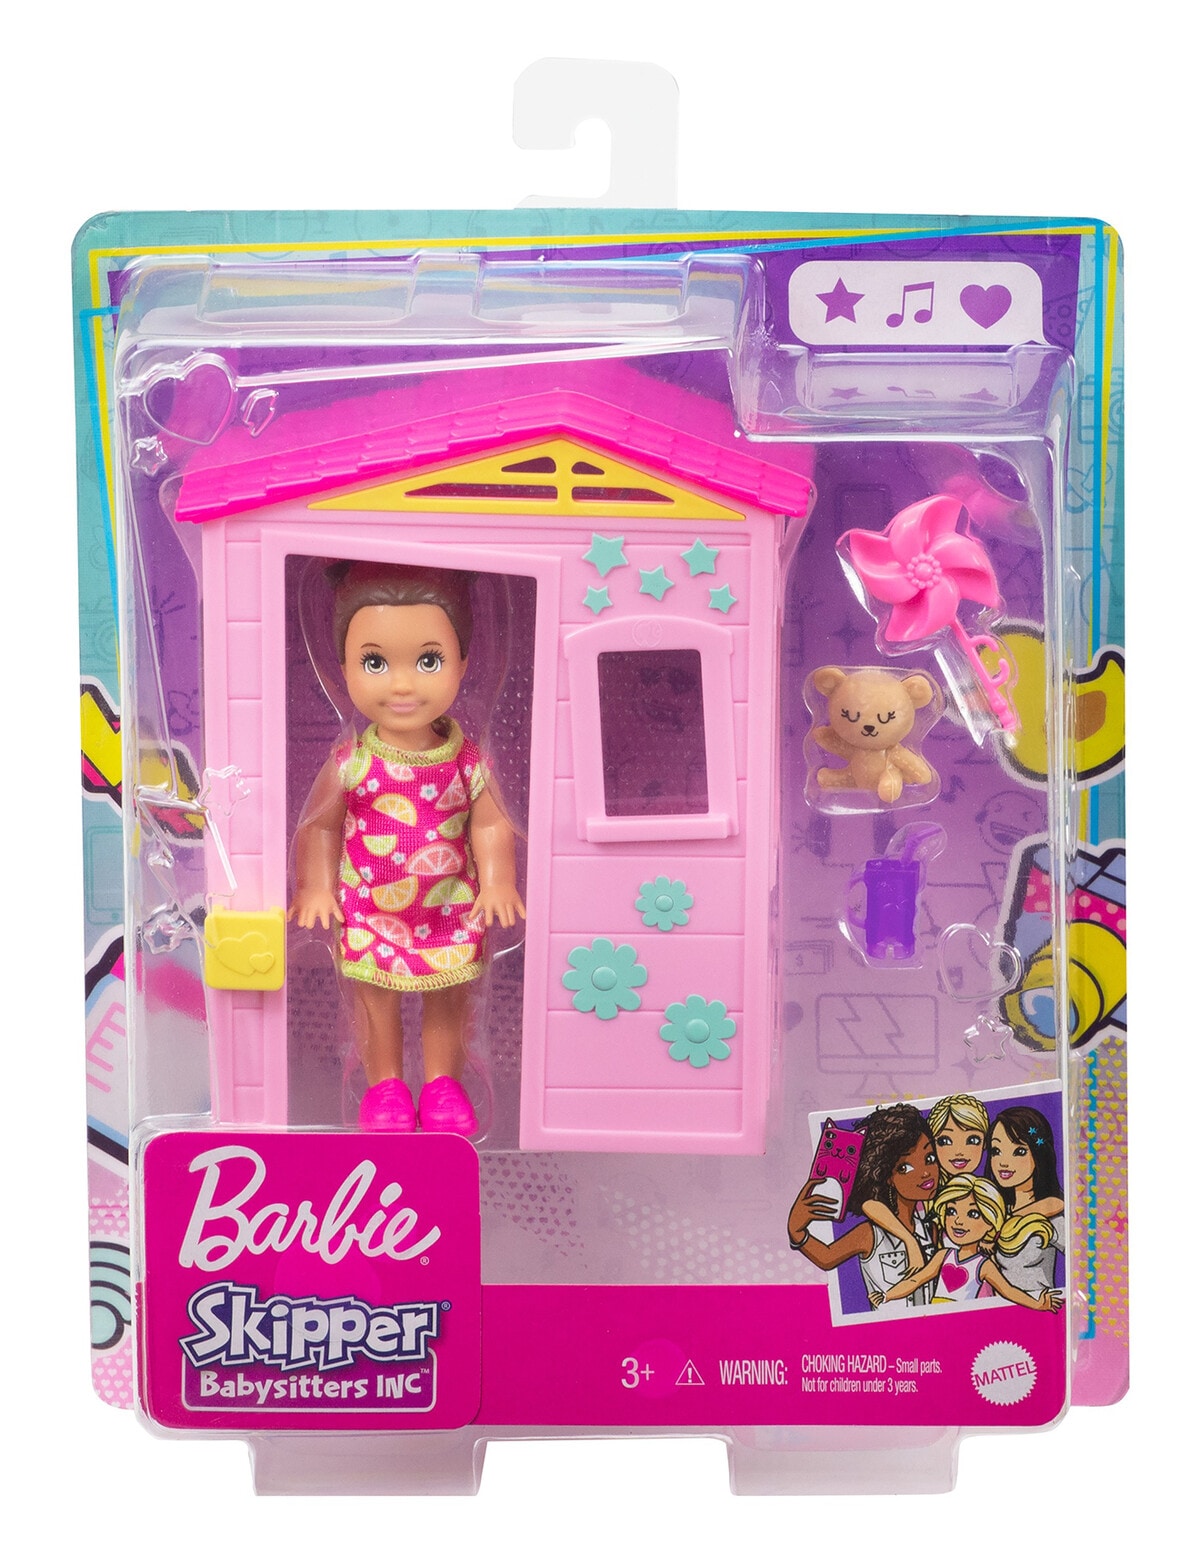 Barbie Skipper Doll & Playset with Accessories, Babysitting Set Themed to  Mealtime, Color-Change Toy Play